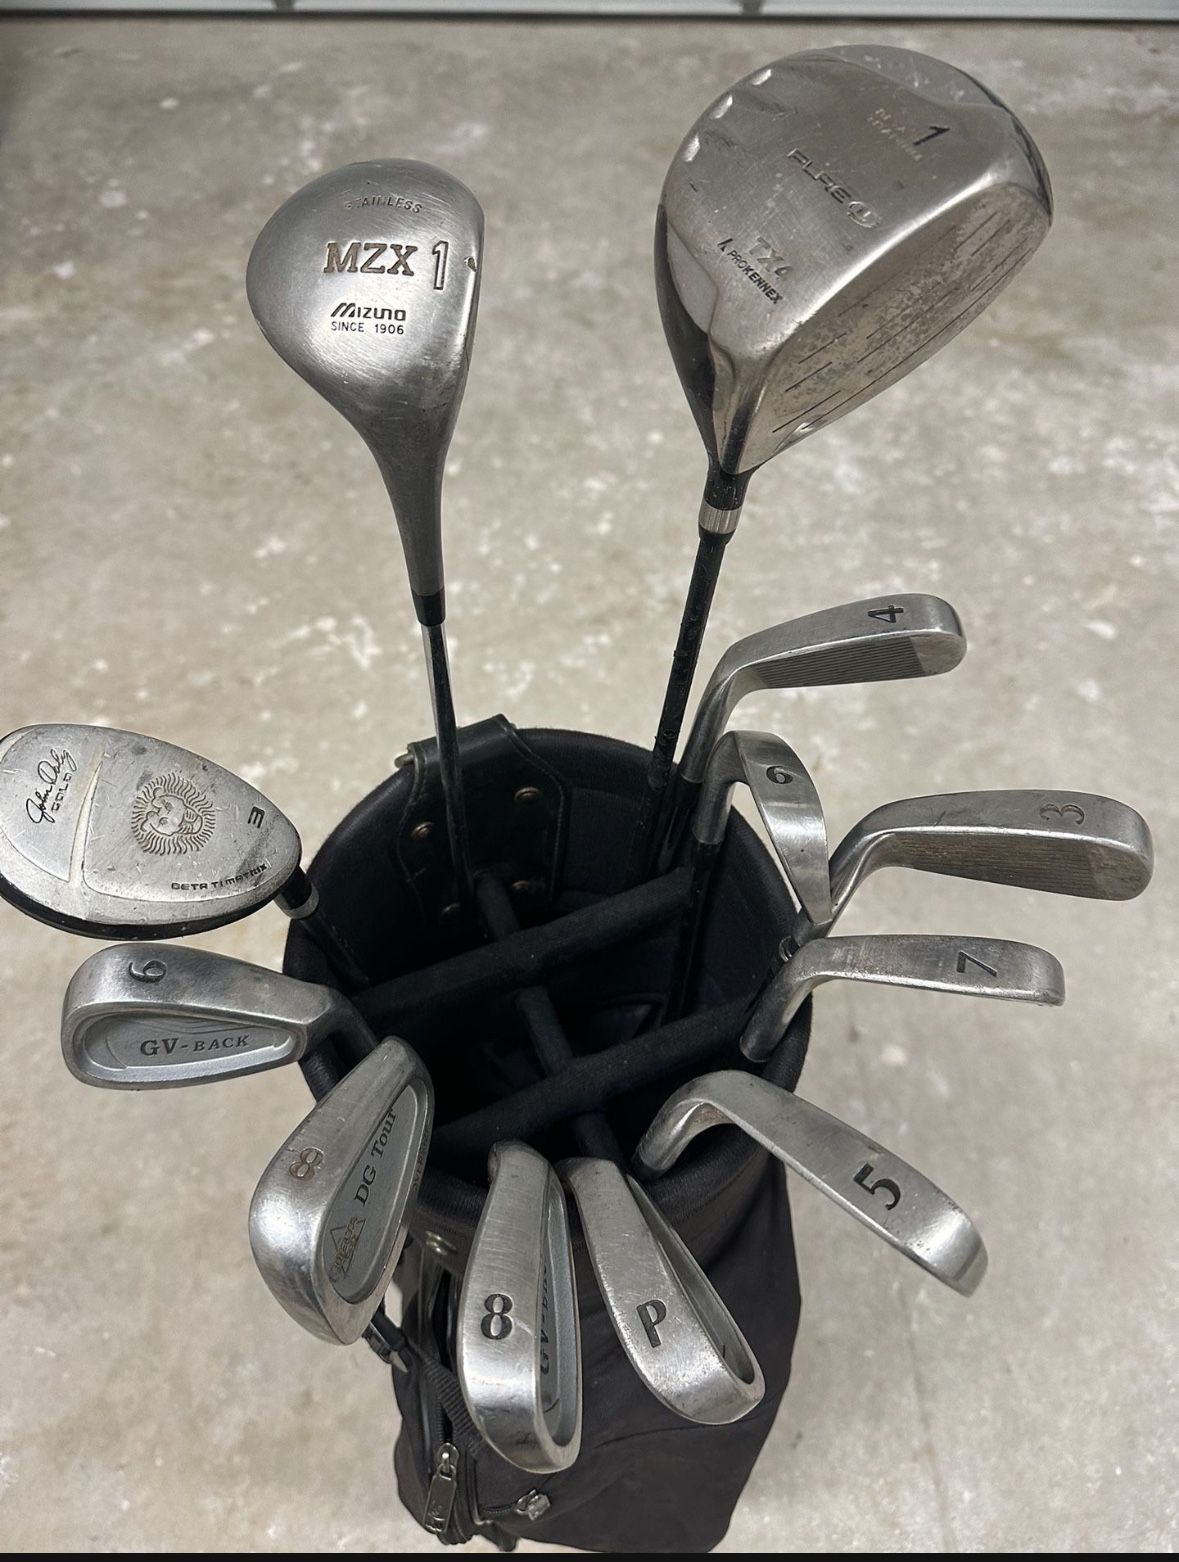 Used Golf Clubs - $120